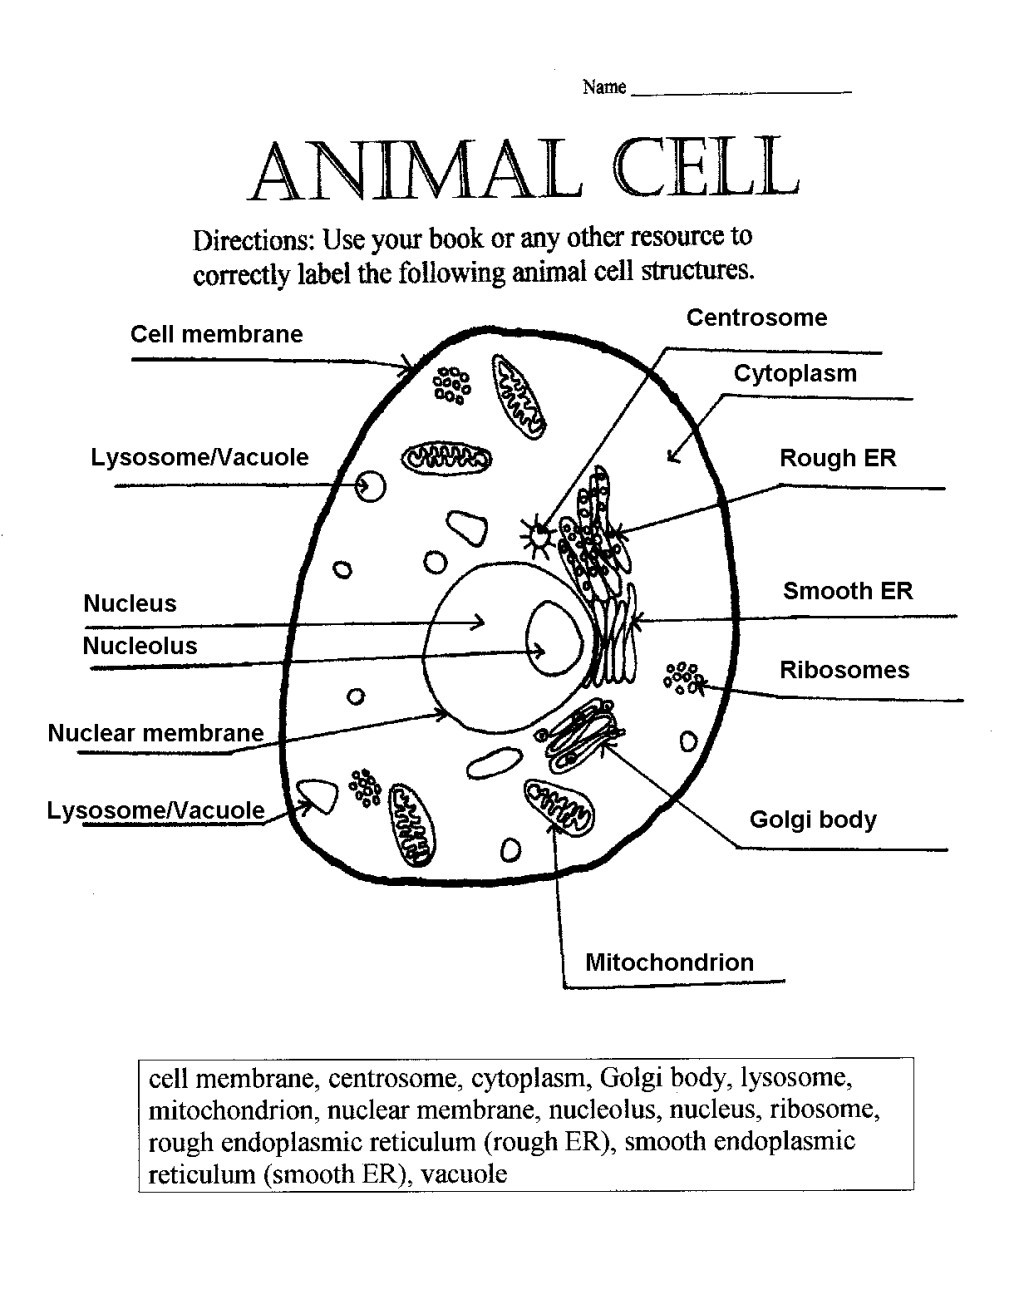 Animal Cells Coloring Worksheet Animal and Plant Cell Worksheet Answer Key